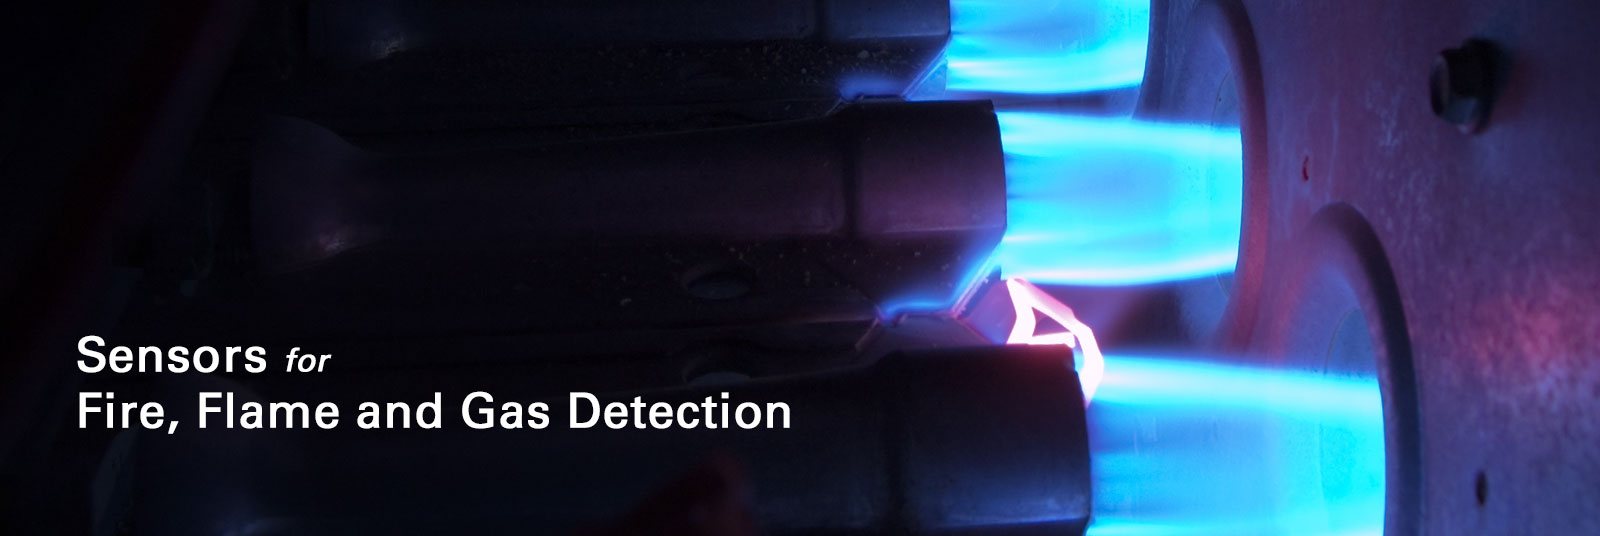 Sensors for fire, flame and gas detection.